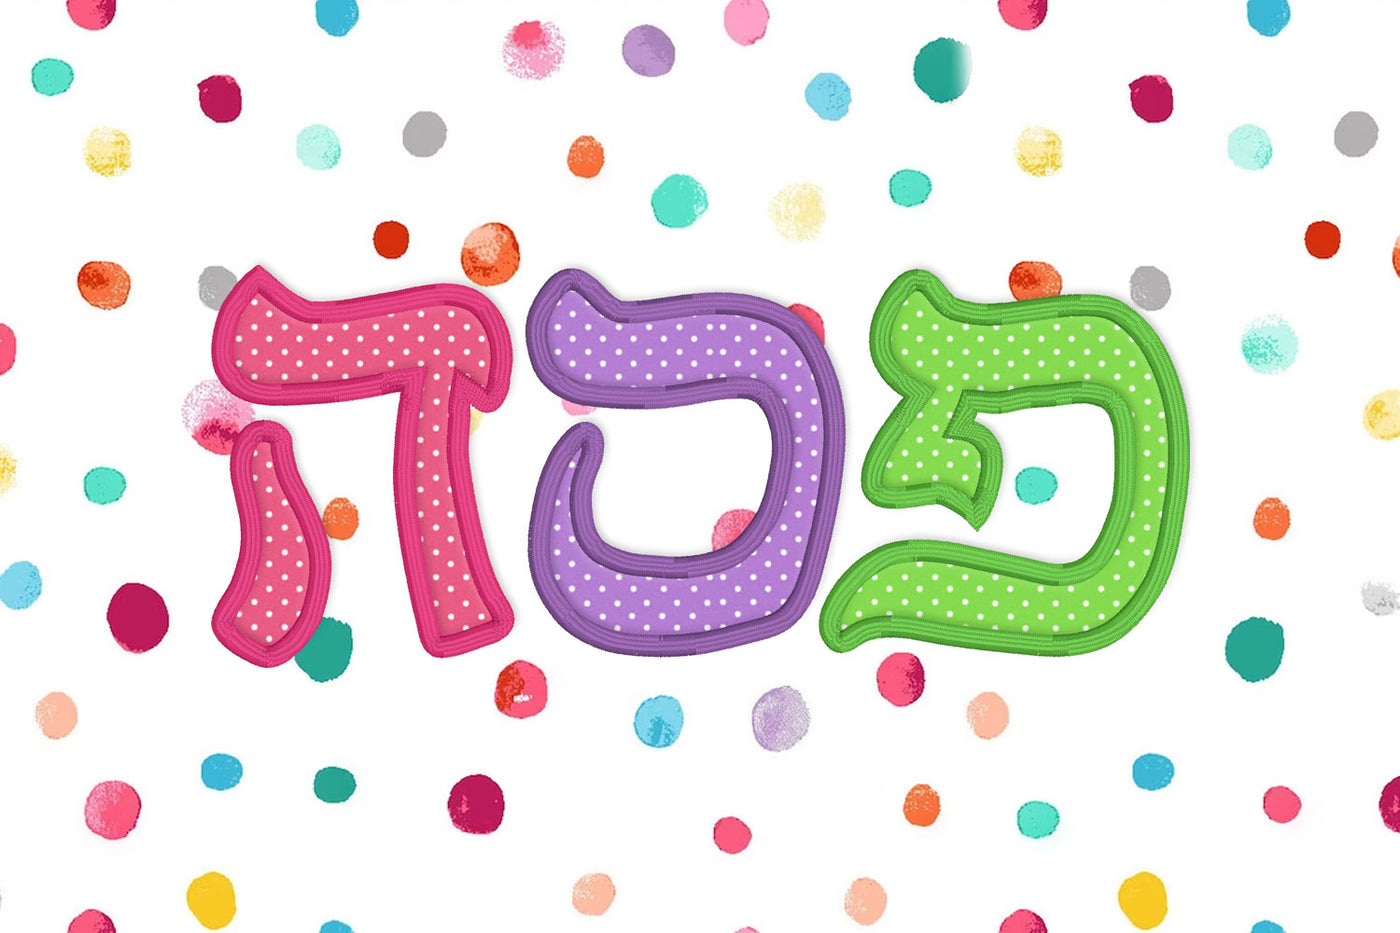 Hebrew Pesach passover bubble letters applique embroidery design